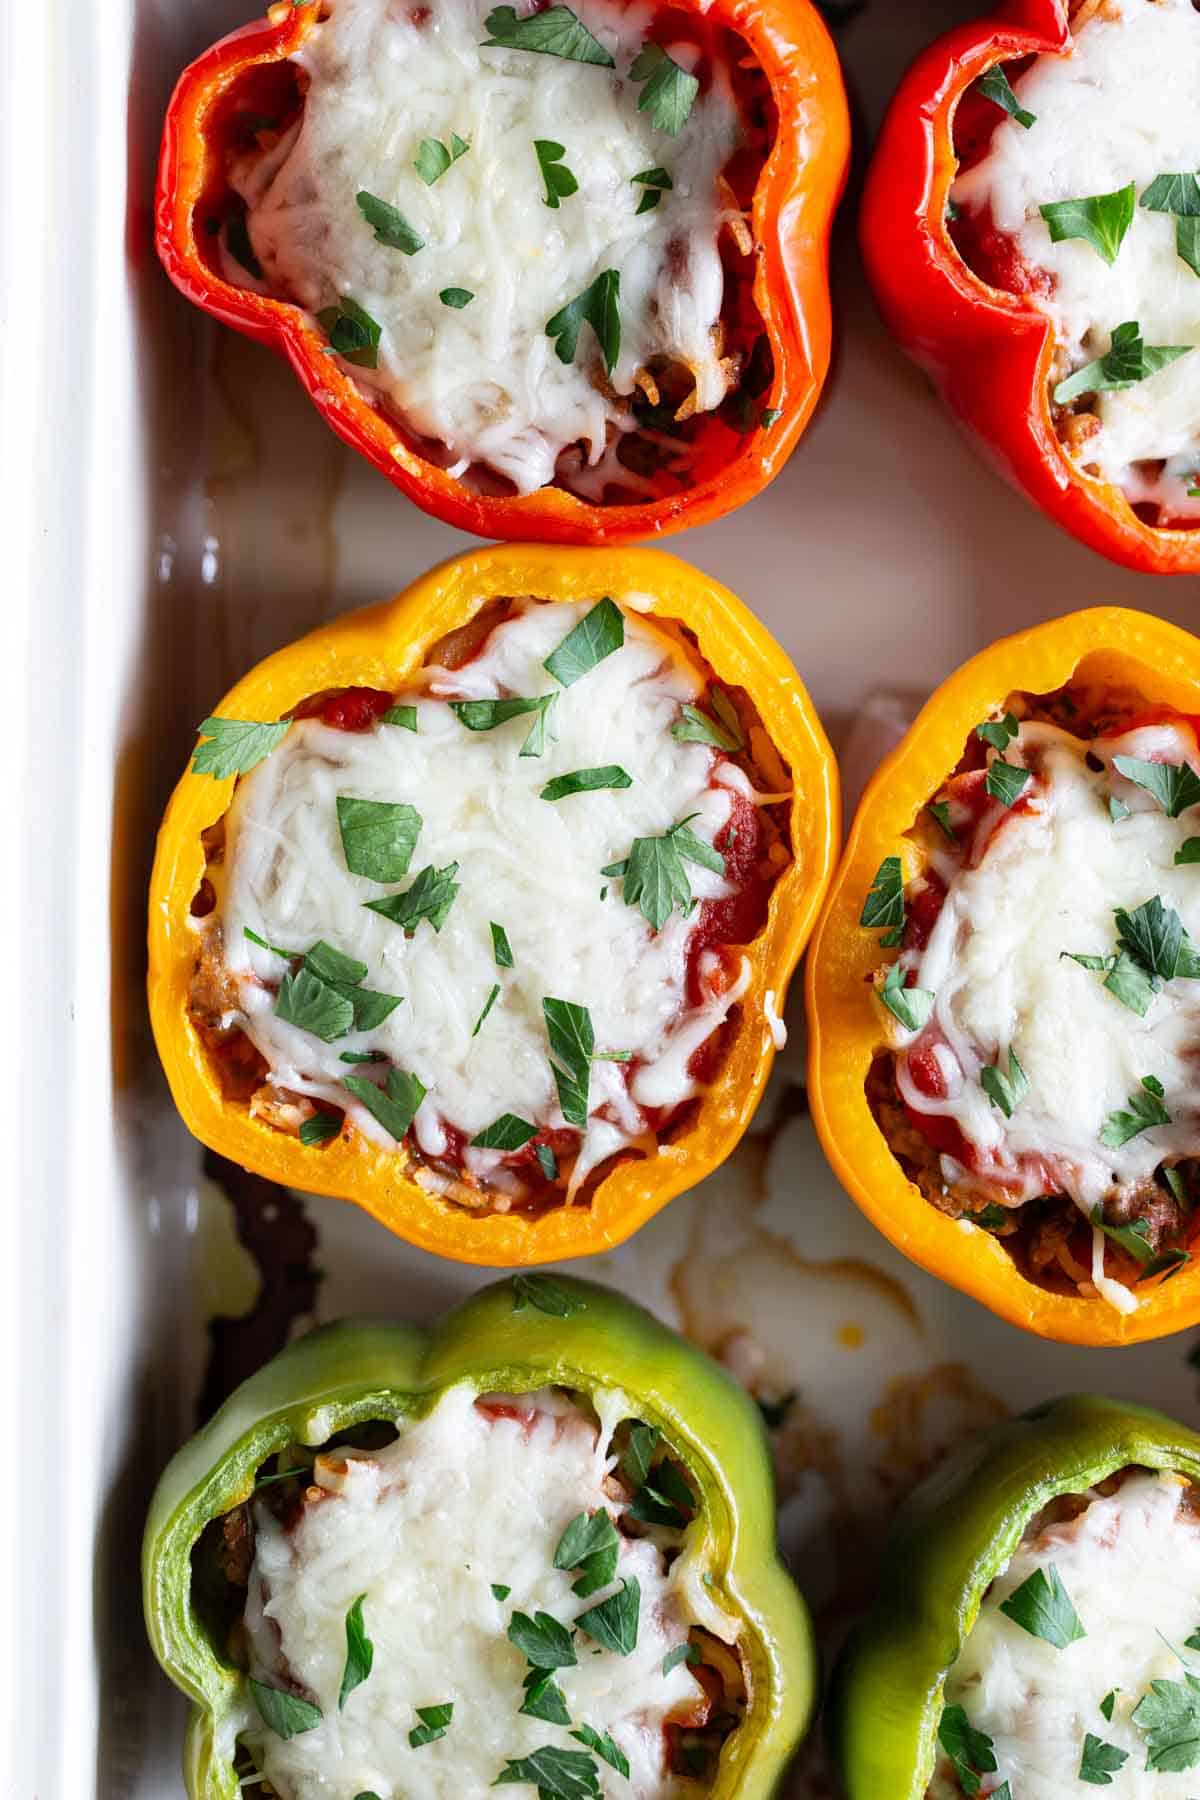 Stuffed bell peppers with melted cheese and chopped herbs in a baking dish.